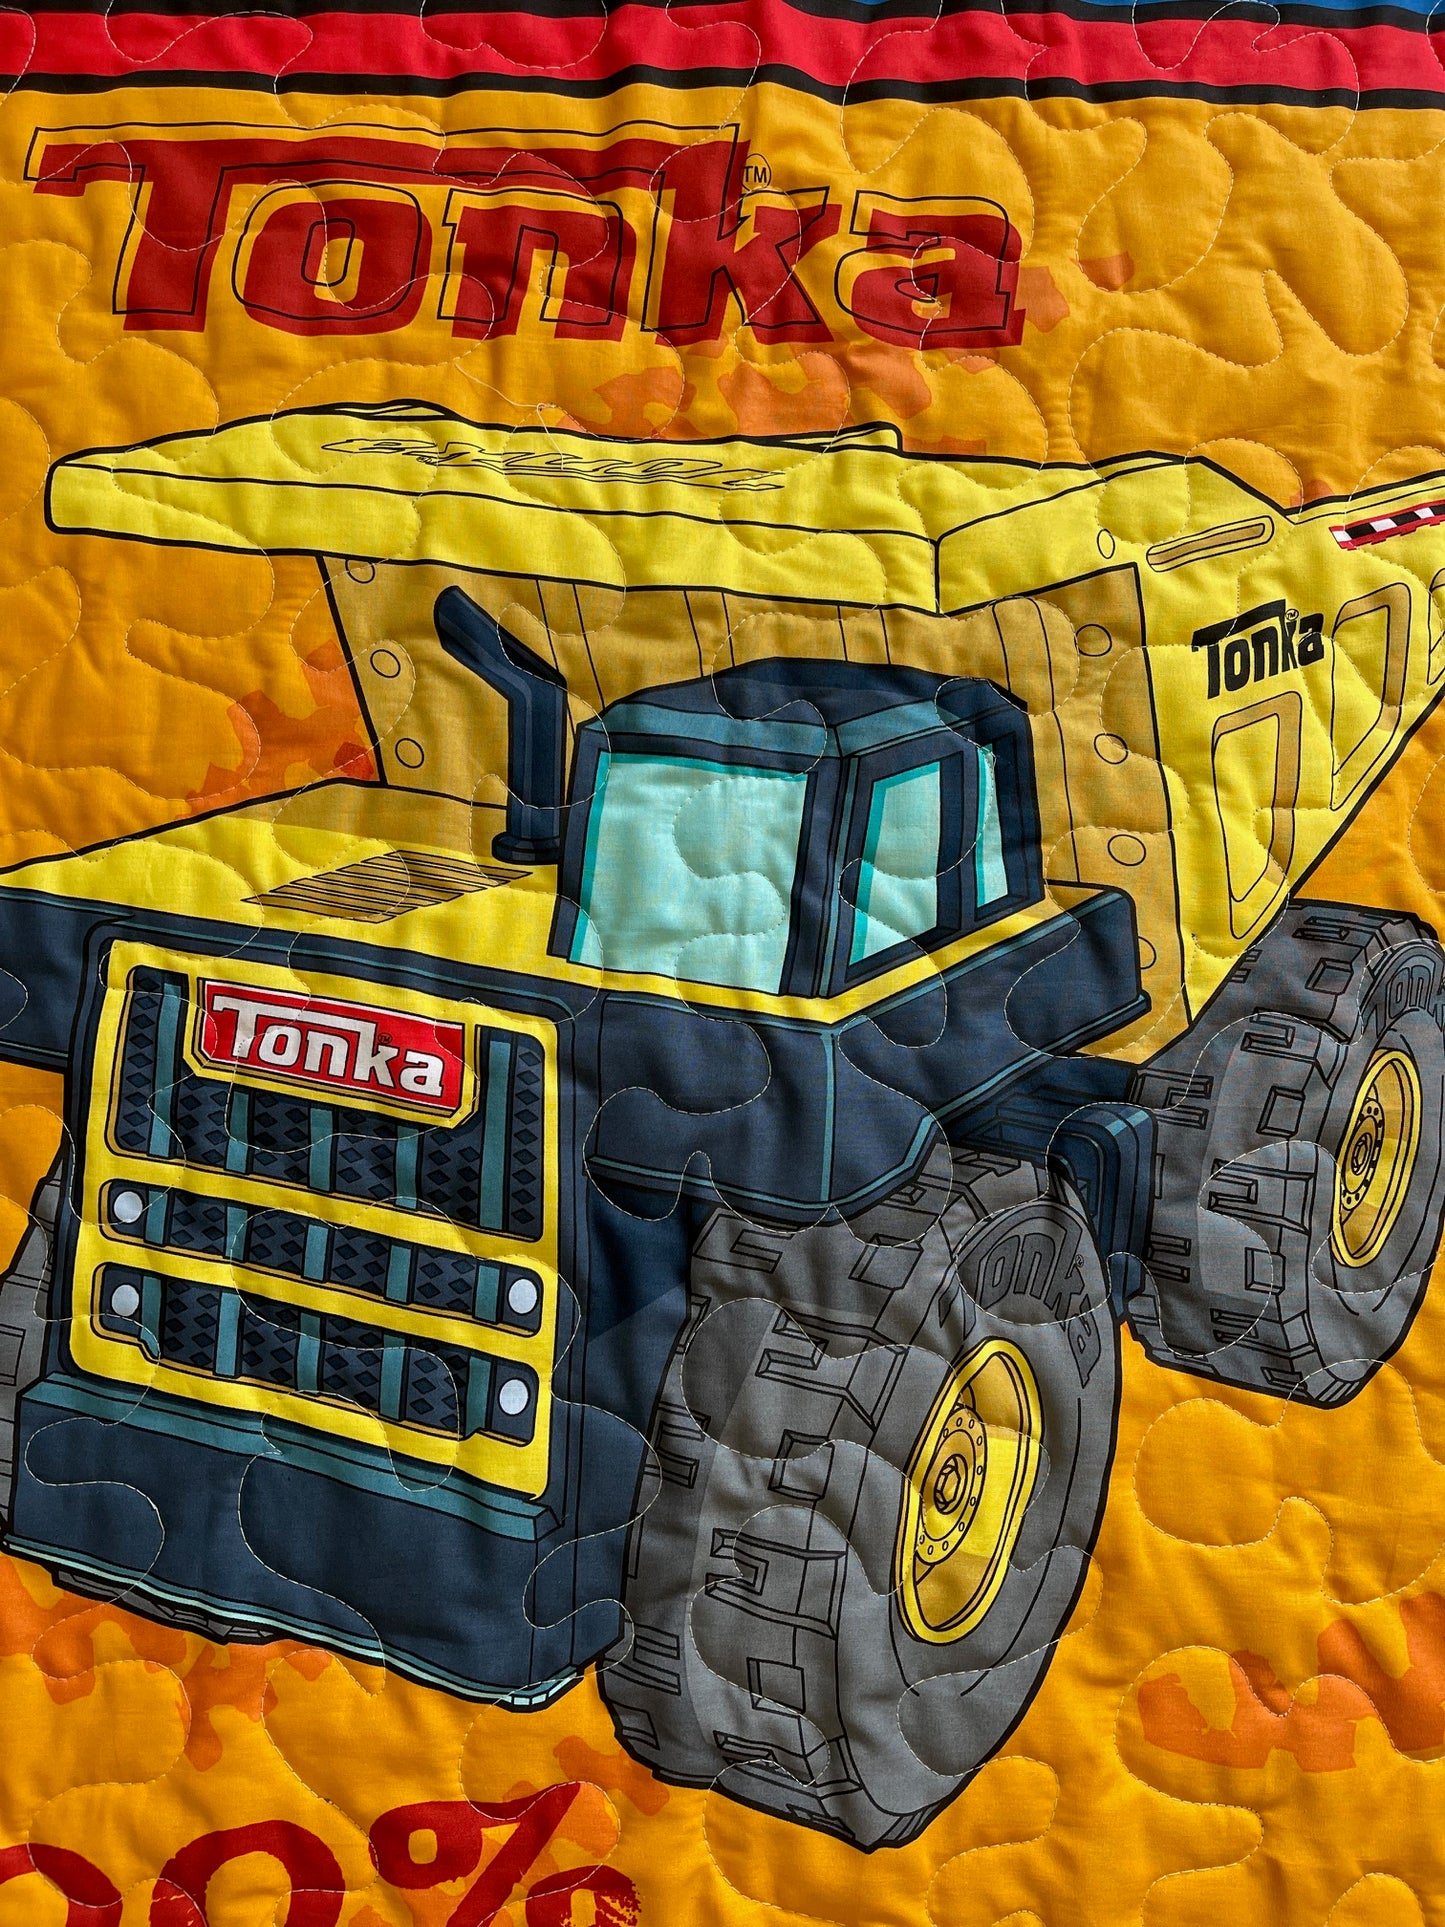 TONKA DUMP TRUCK 100% TOUGH 36"X44" "TIME TO WORK" QUILTED BLANKET